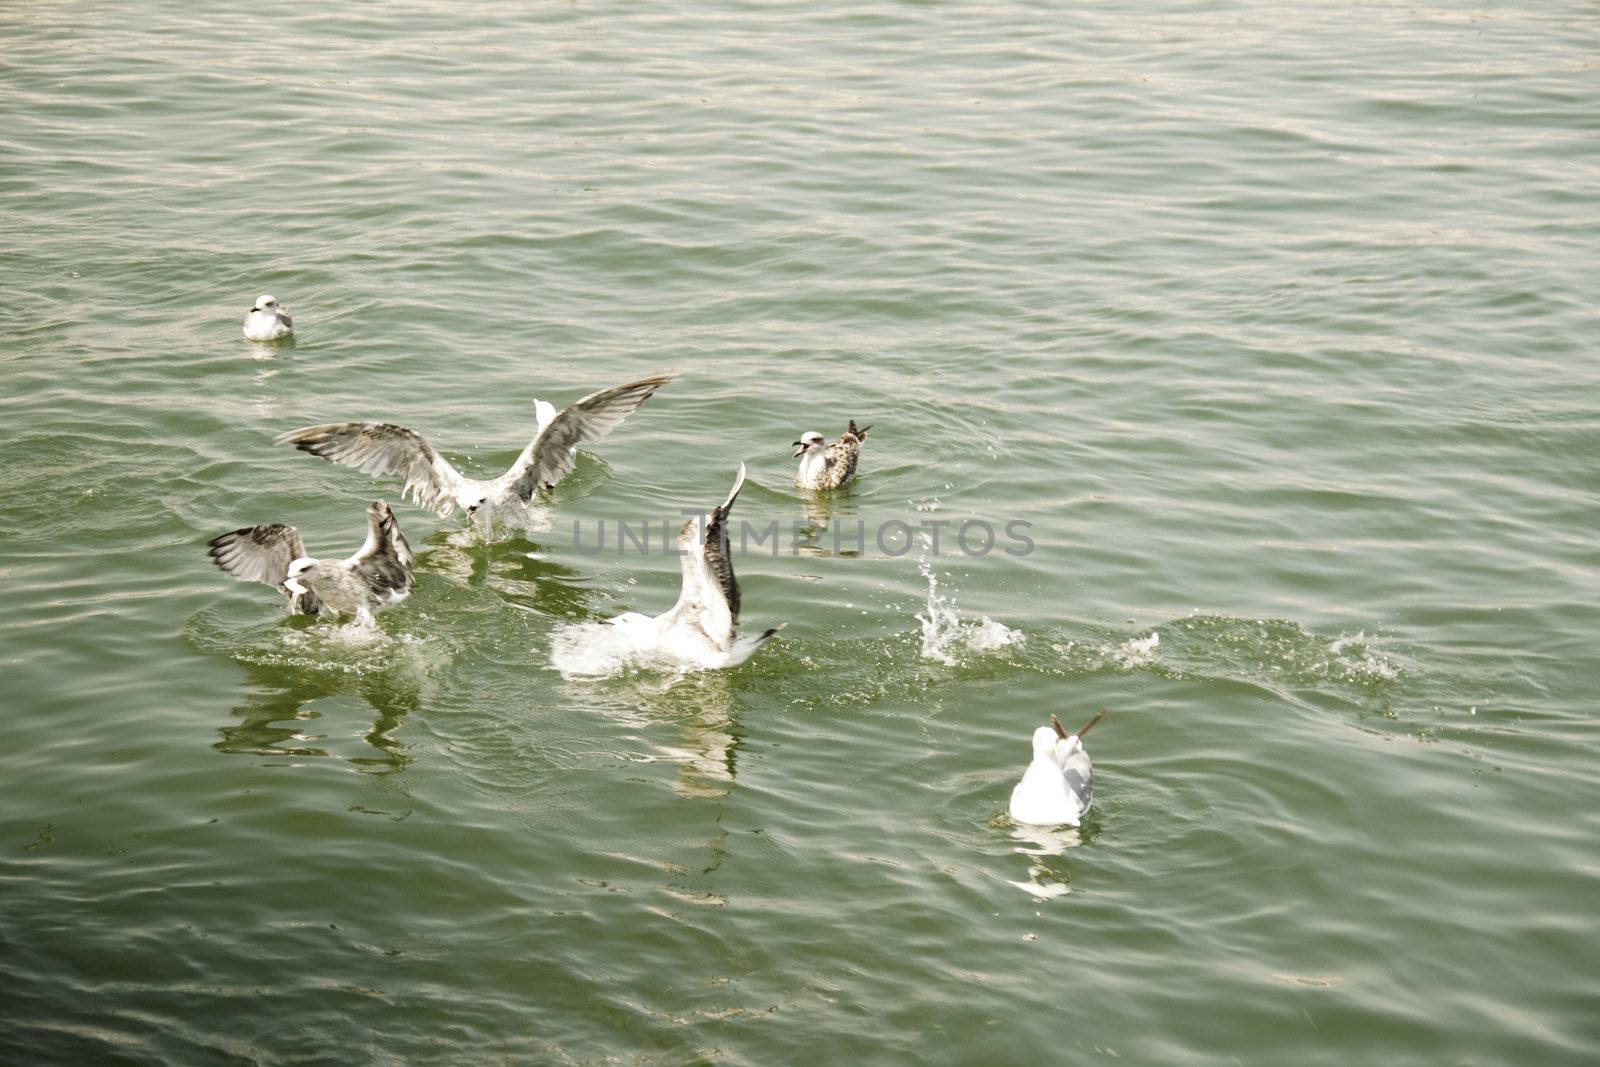 A group of seagulls battling for food